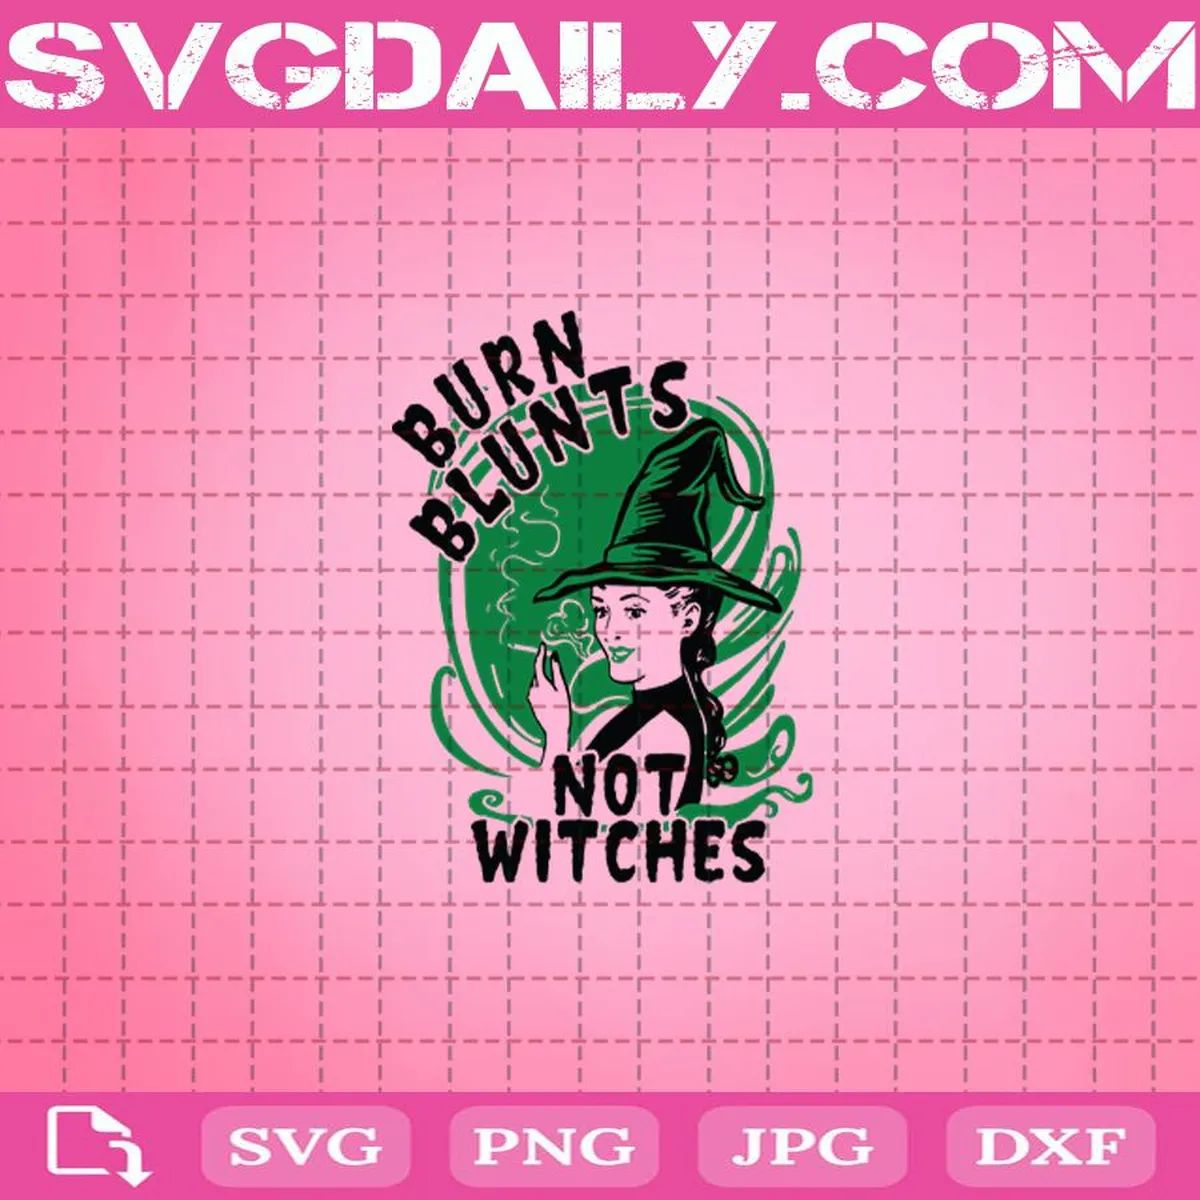 Burn Blunts Not Witches Svg, Smoking Weed Burn Blunts Not Witches Svg, Witches Svg, Smoking Weed Svg, Weed Svg